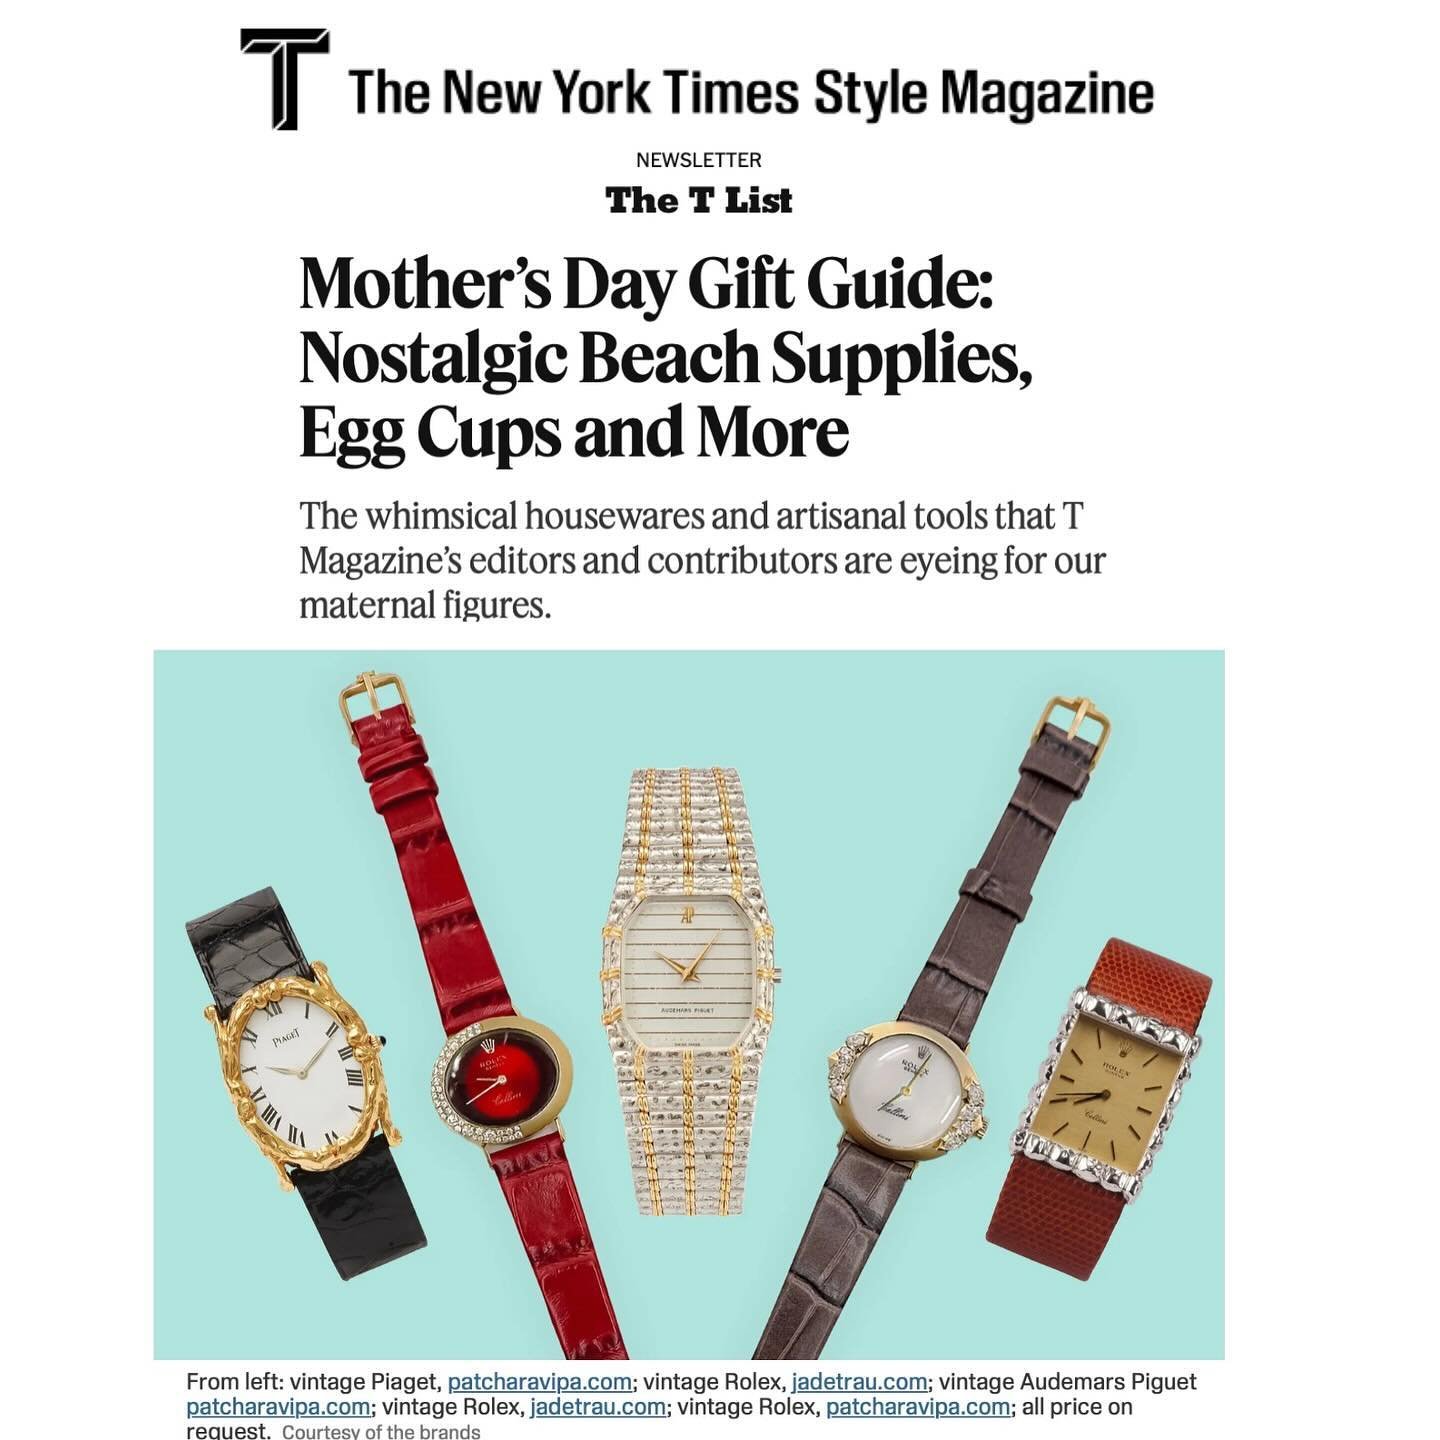 The T List. @patcharavipa featured in the @nytimes #TList #mothersday #yayapublicity #watchesandjewels #jewelry #finejewelry Huge Thanks to @ang.koh